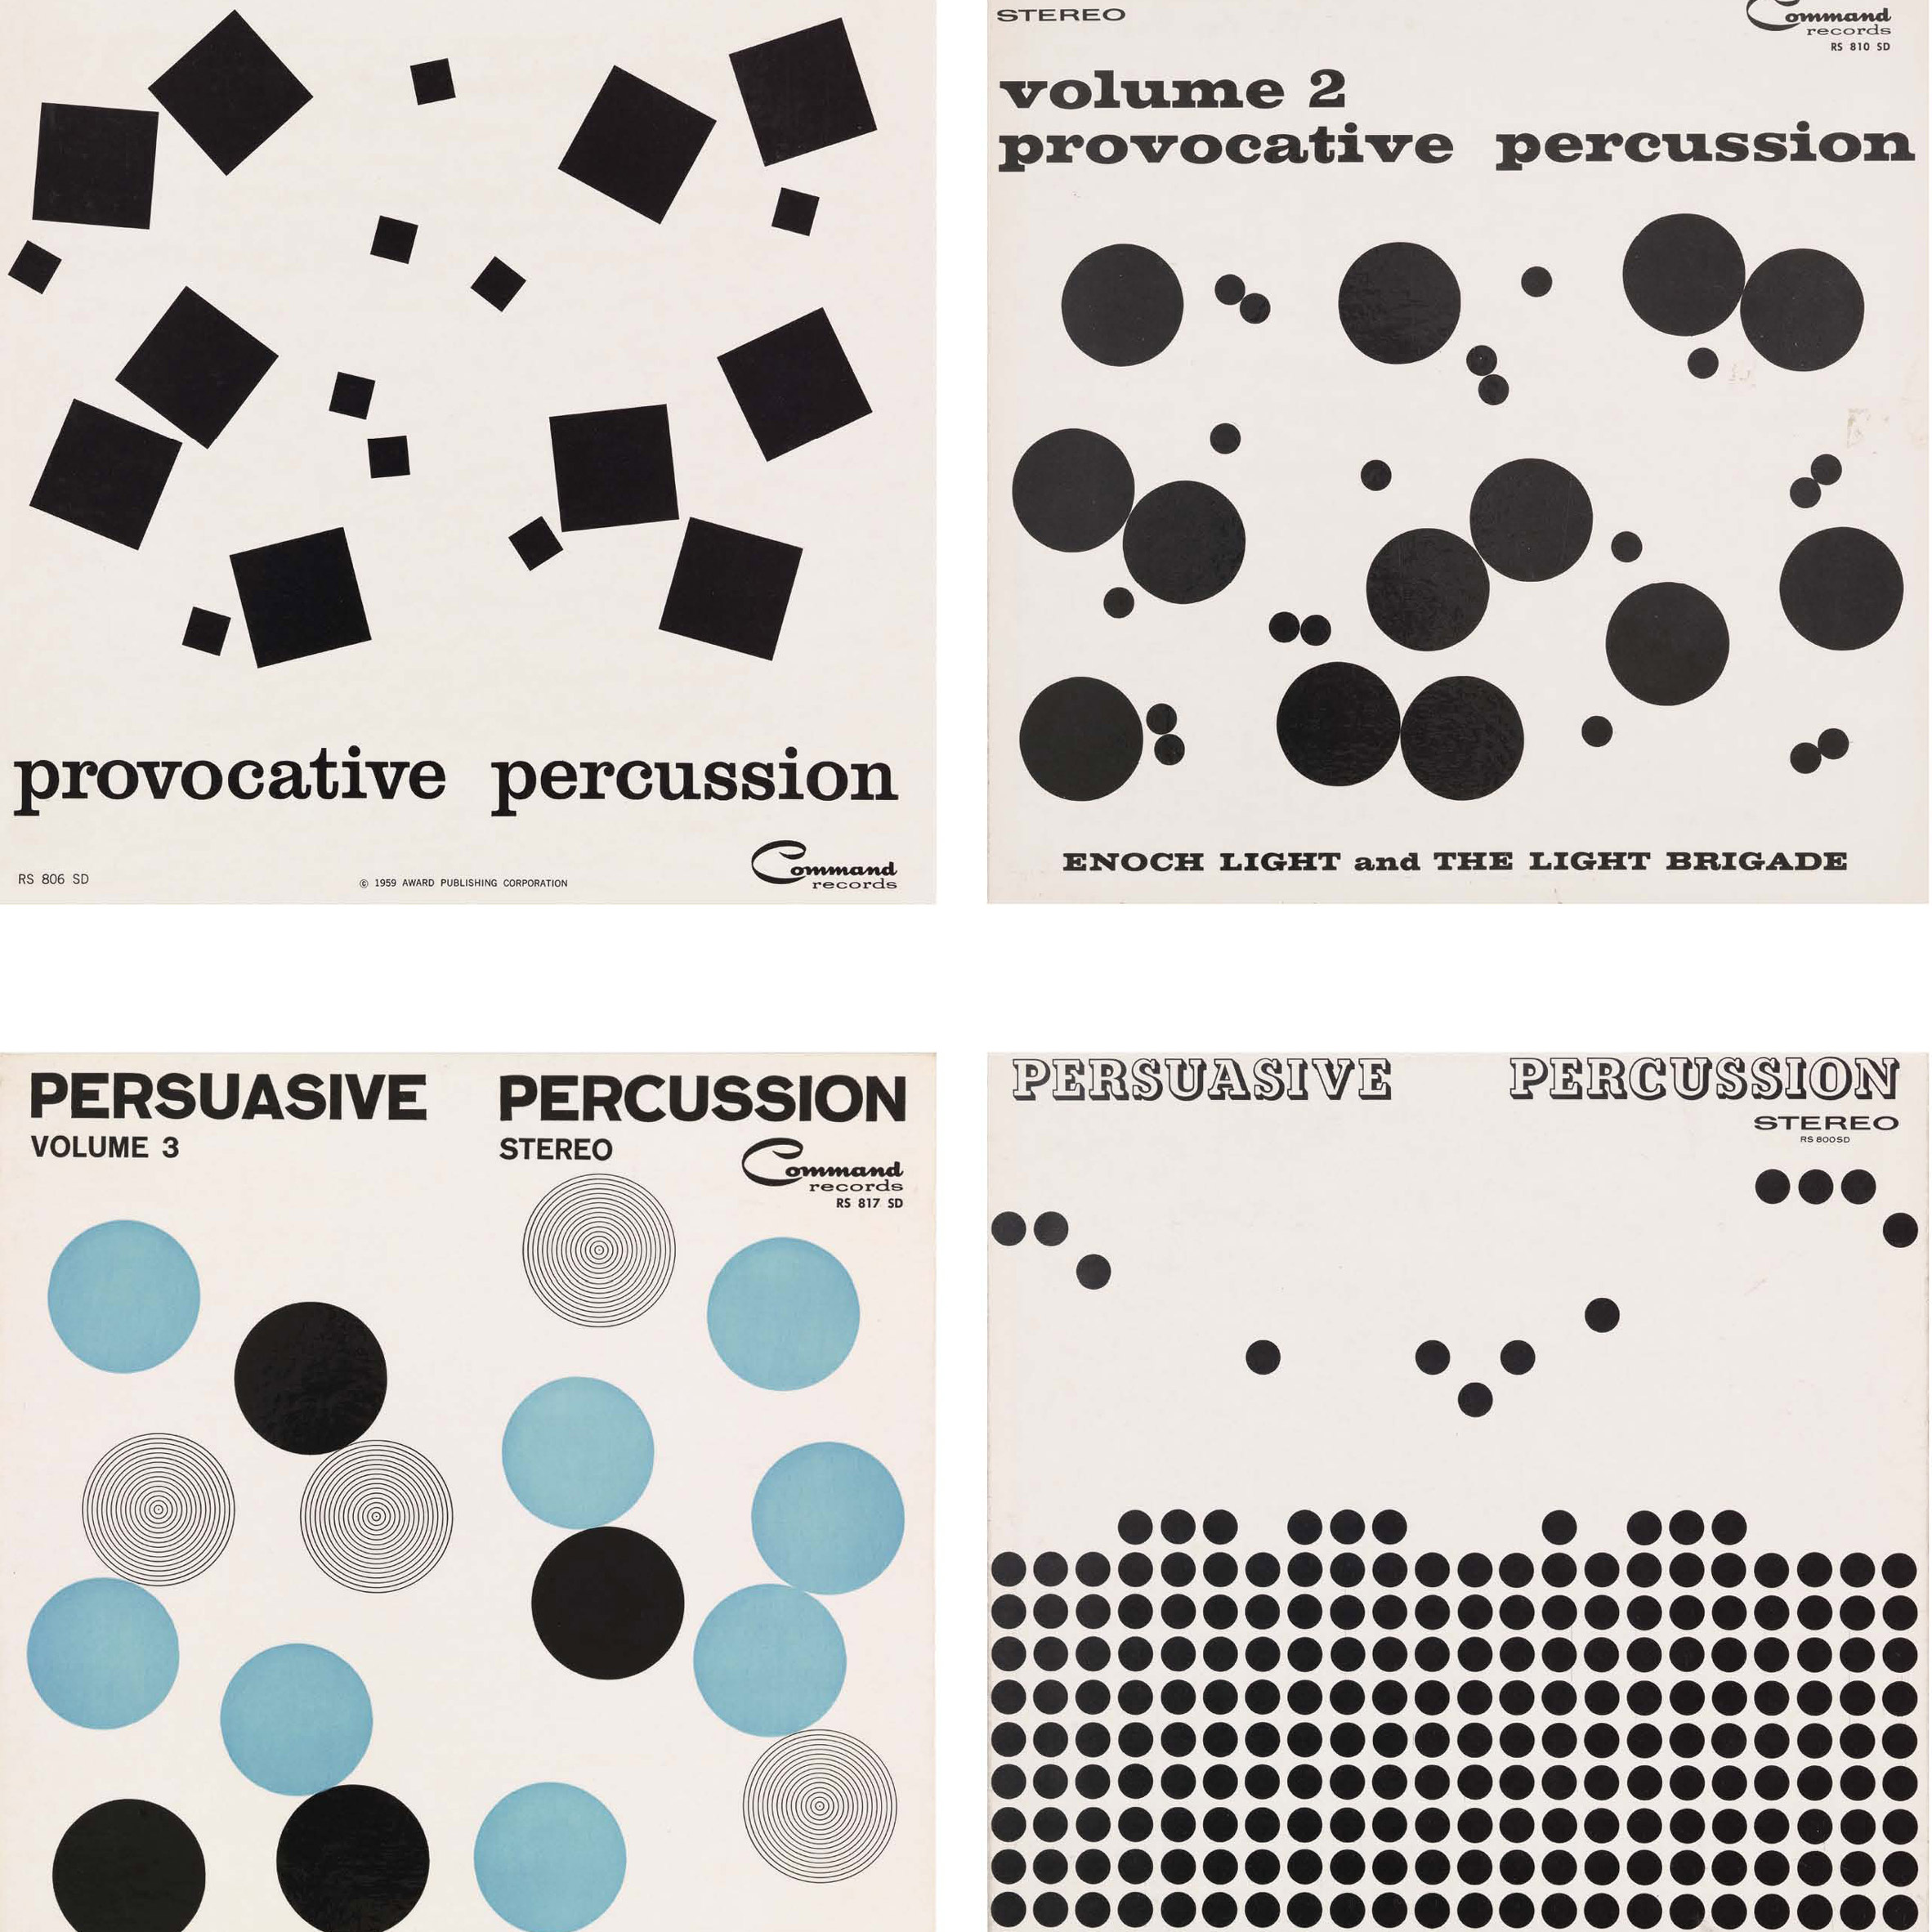 Provocative and Persuasive Percussion by Josef Albers, 1959/60, Picture credit: copyright © 2020 The Josef and Anni Albers Foundation/Artists Rights Society (ARS), New York/DACS, London / Photo: Tim Nighswander/Imaging4Art